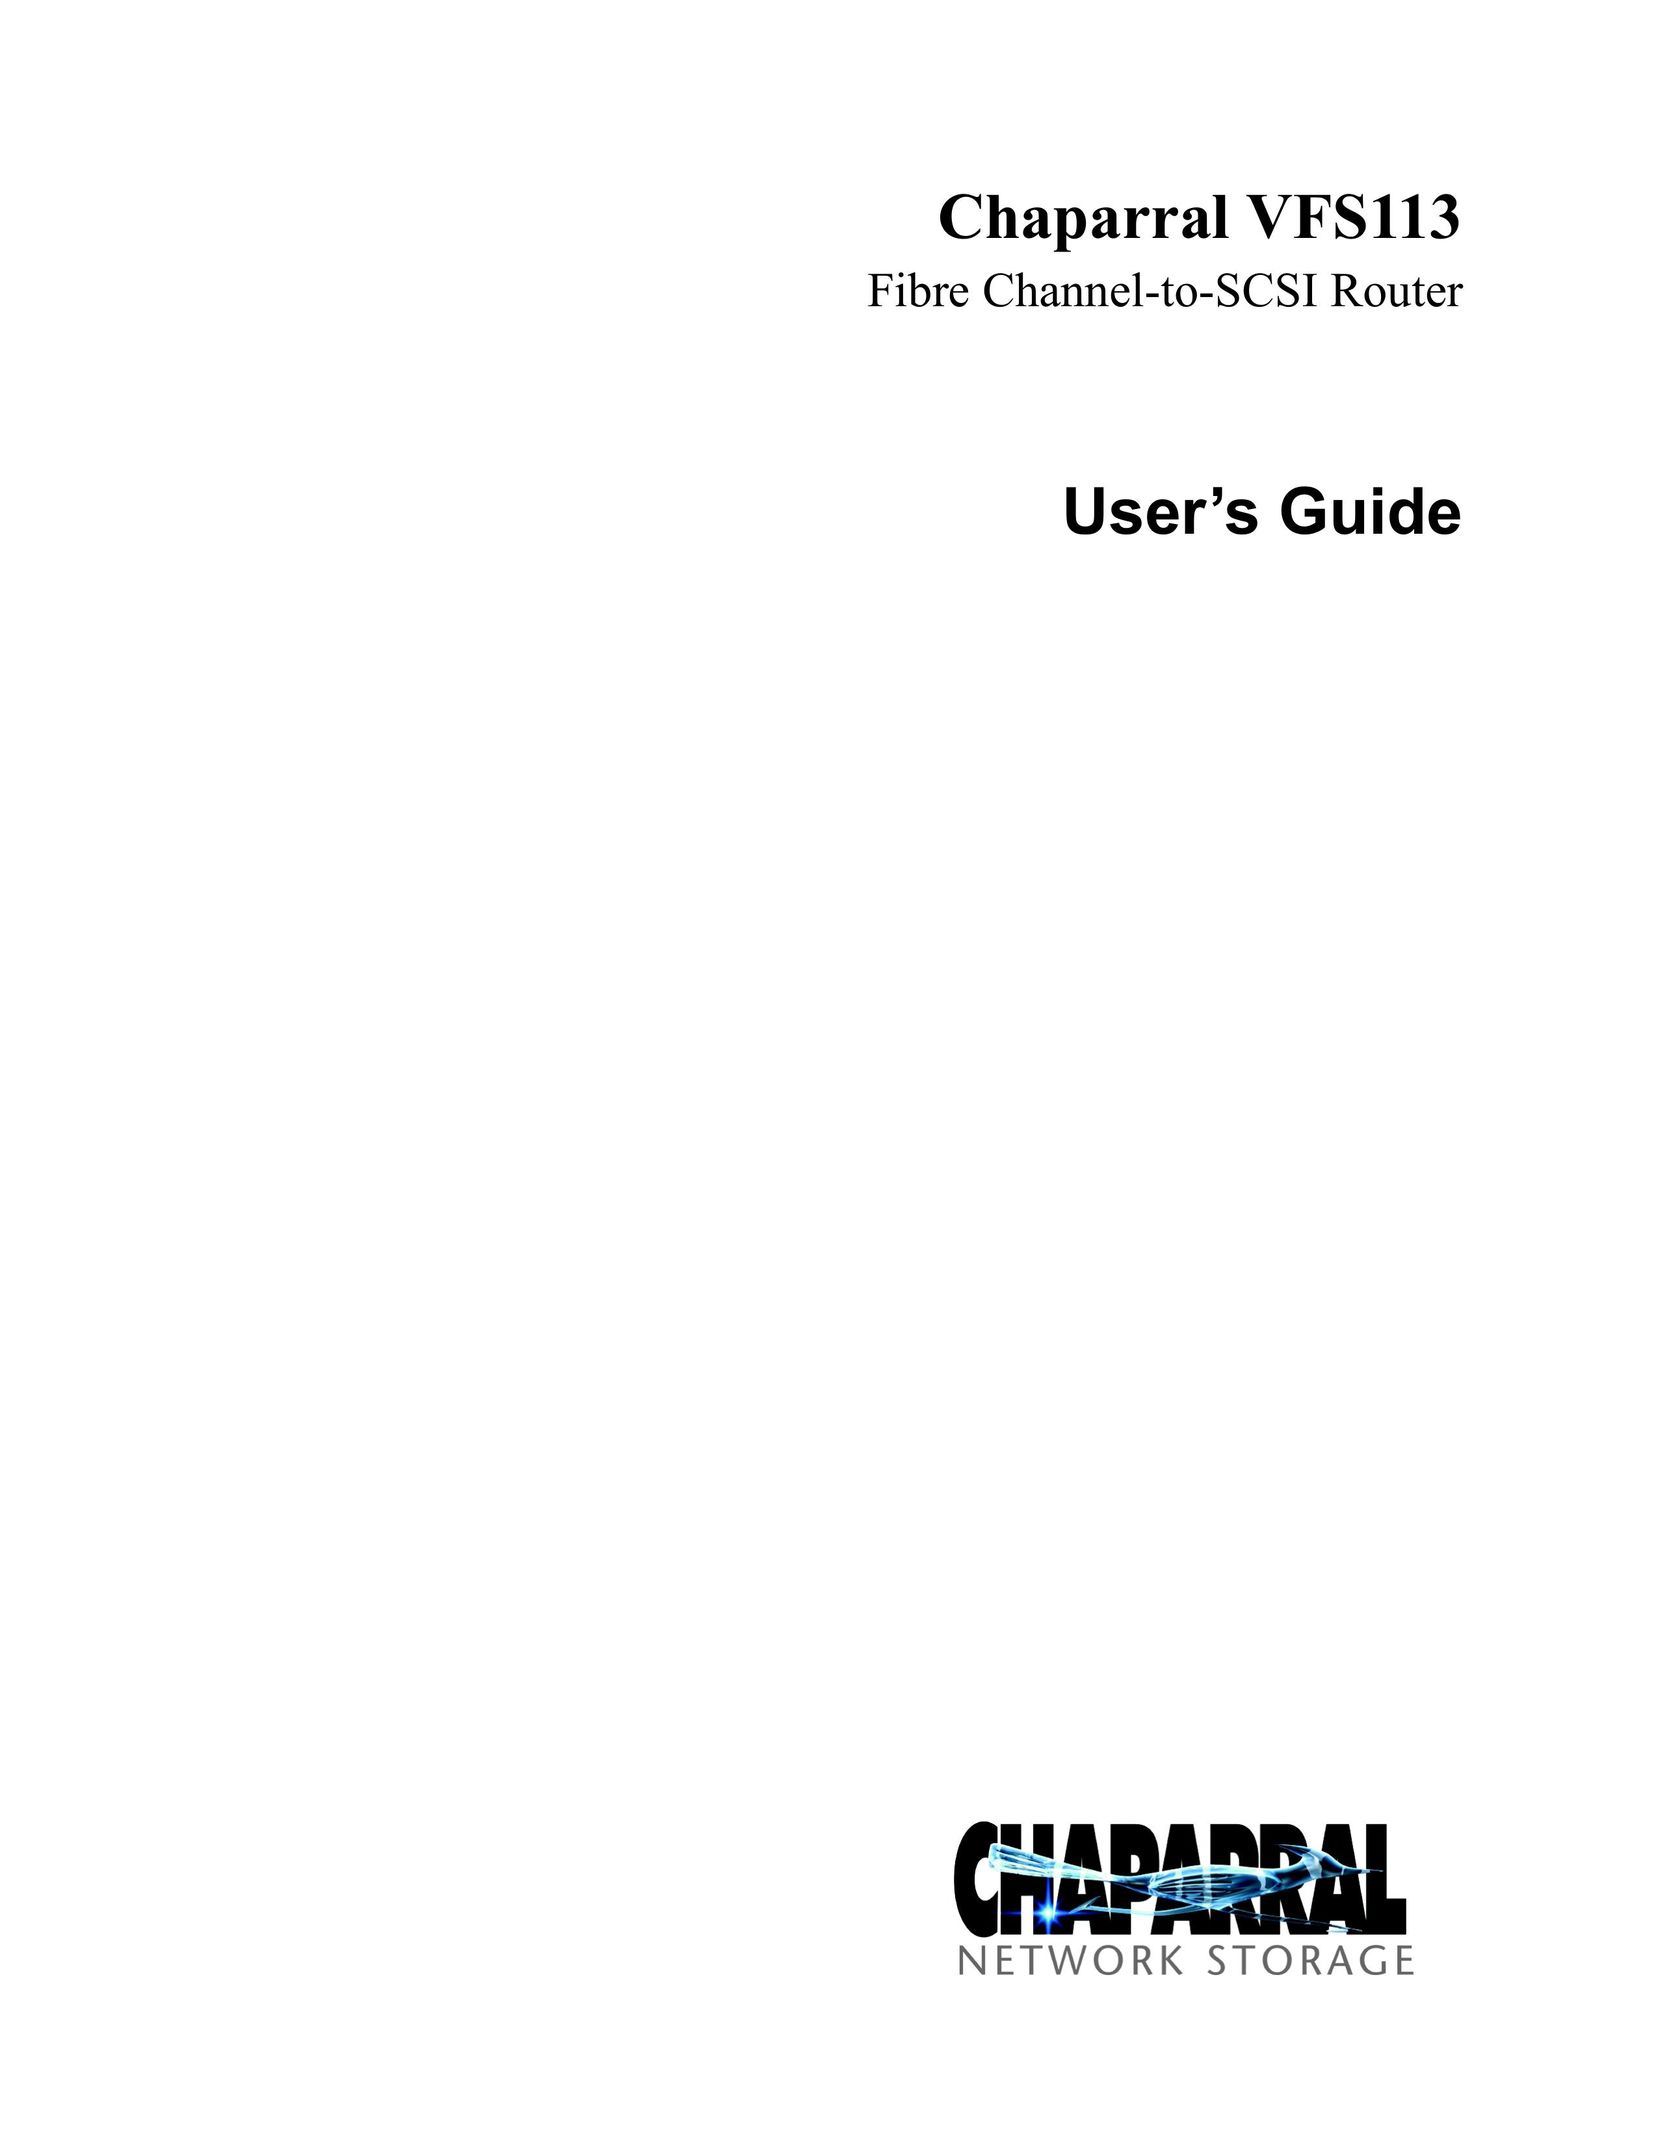 Chaparral VFS113 Network Router User Manual